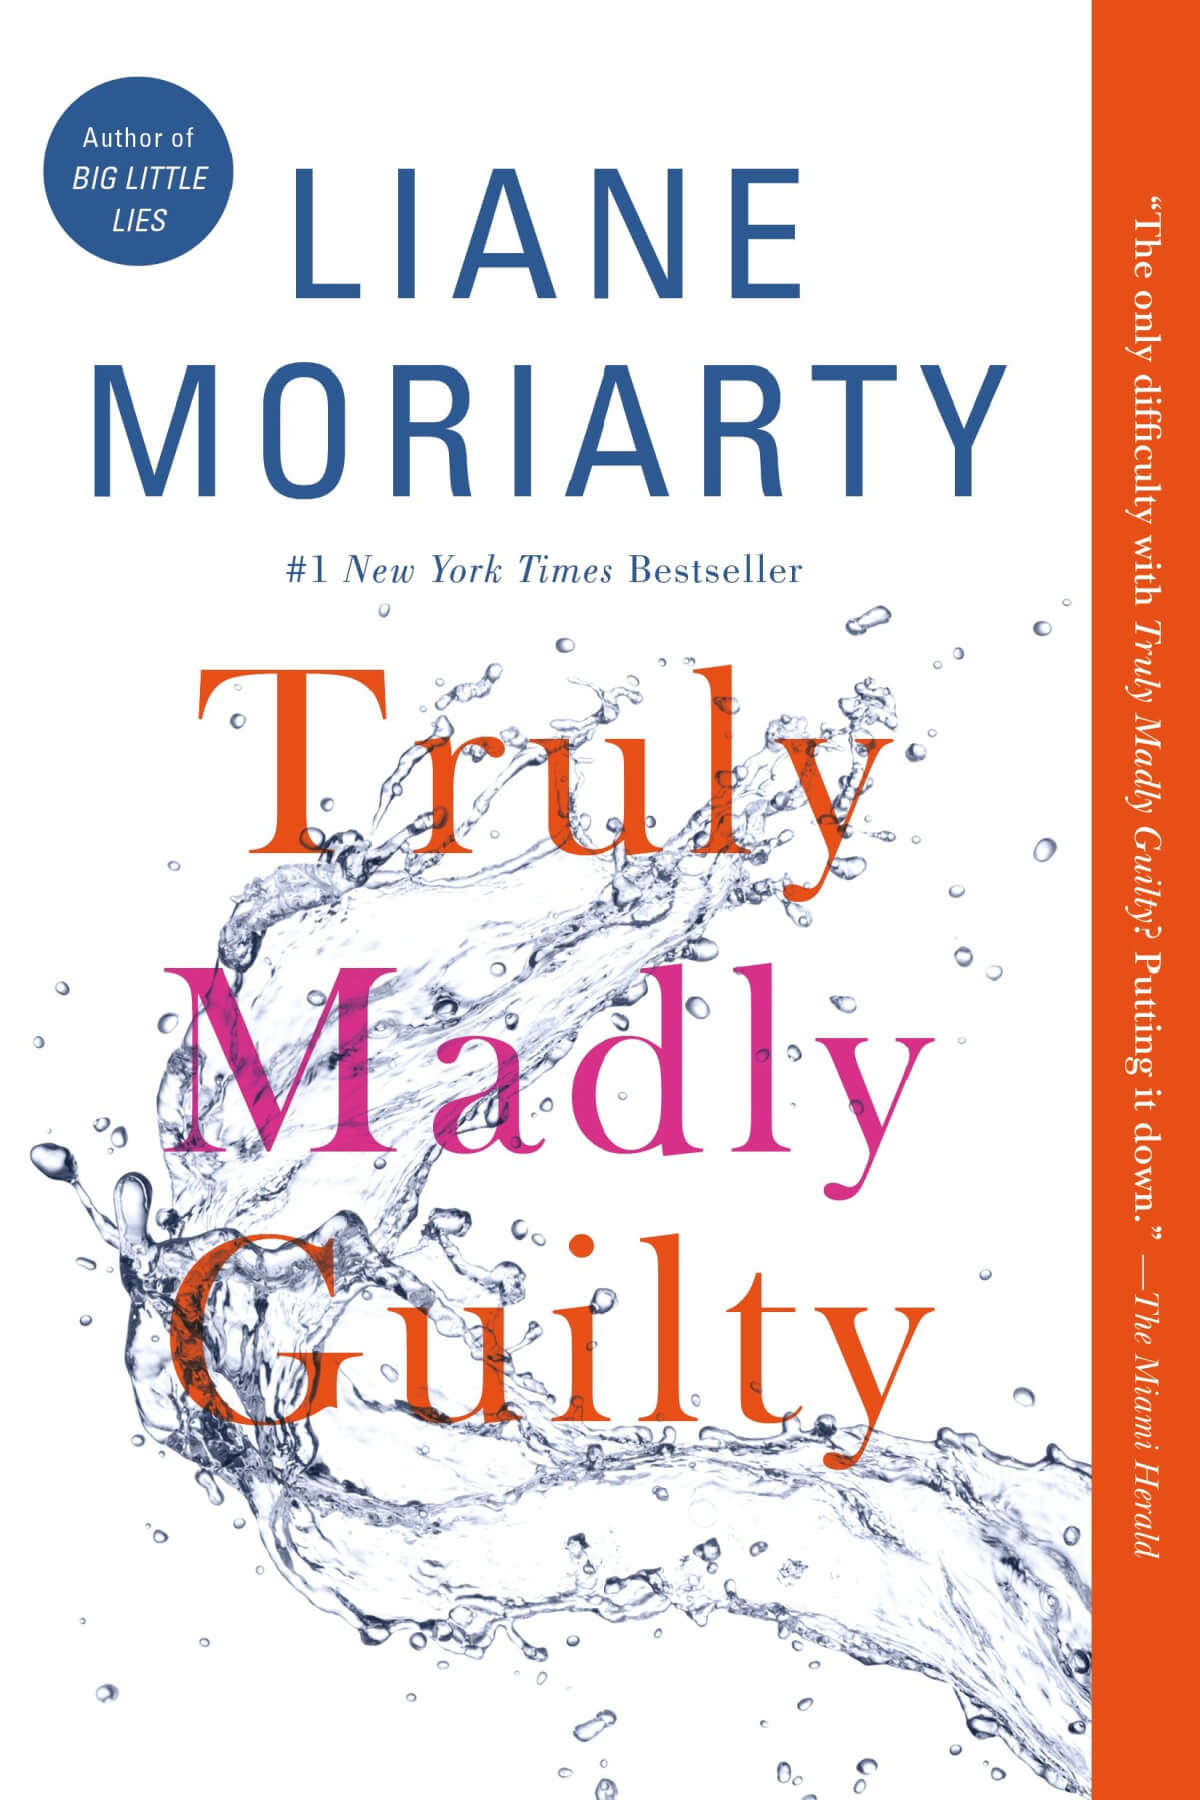 Liane Moriarty's book "Truly Madly Guilty"